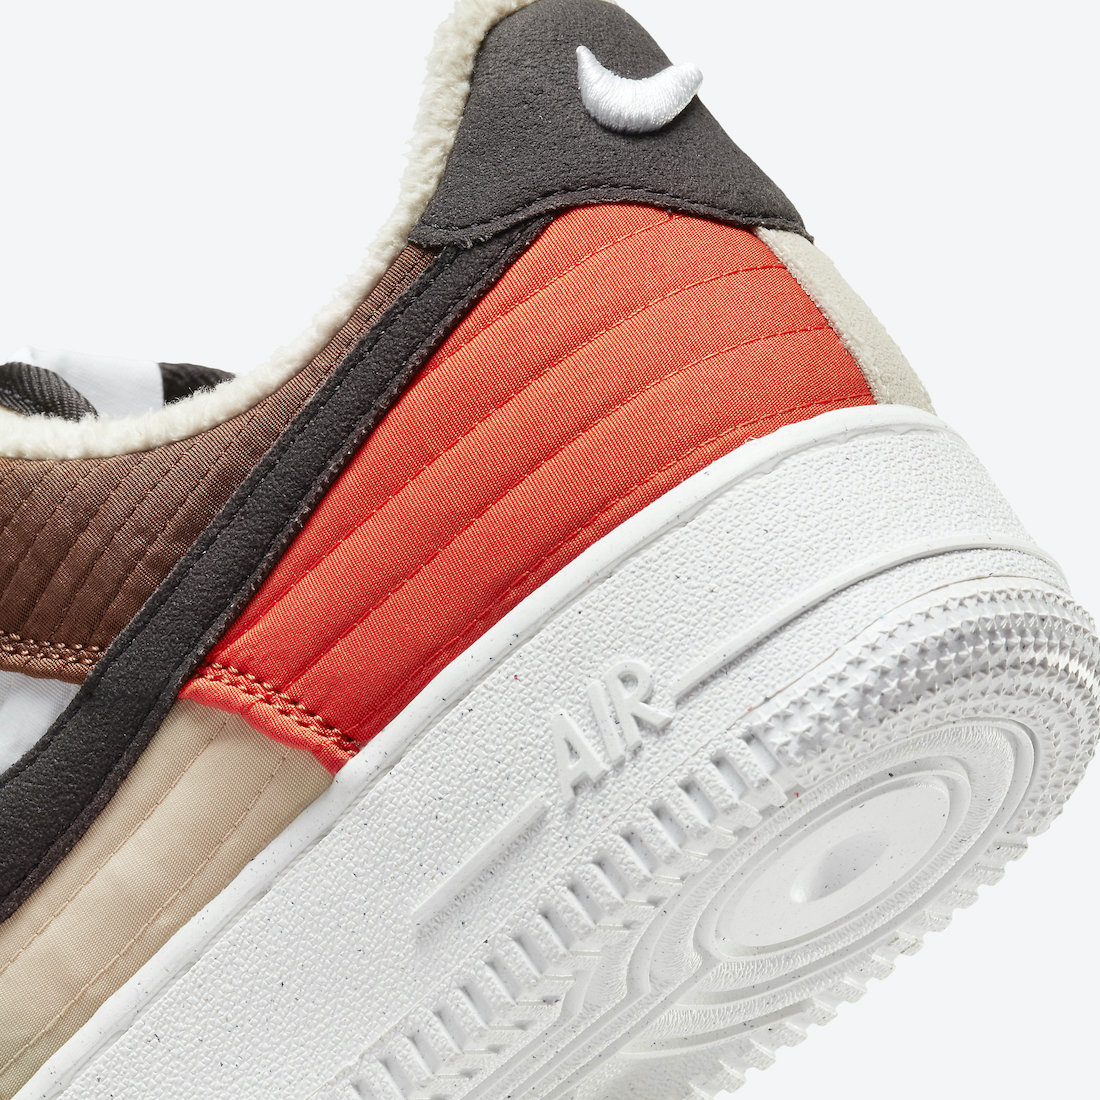 Nike Air Force 1 Low LXX Toasty DH0775-200 Release Date